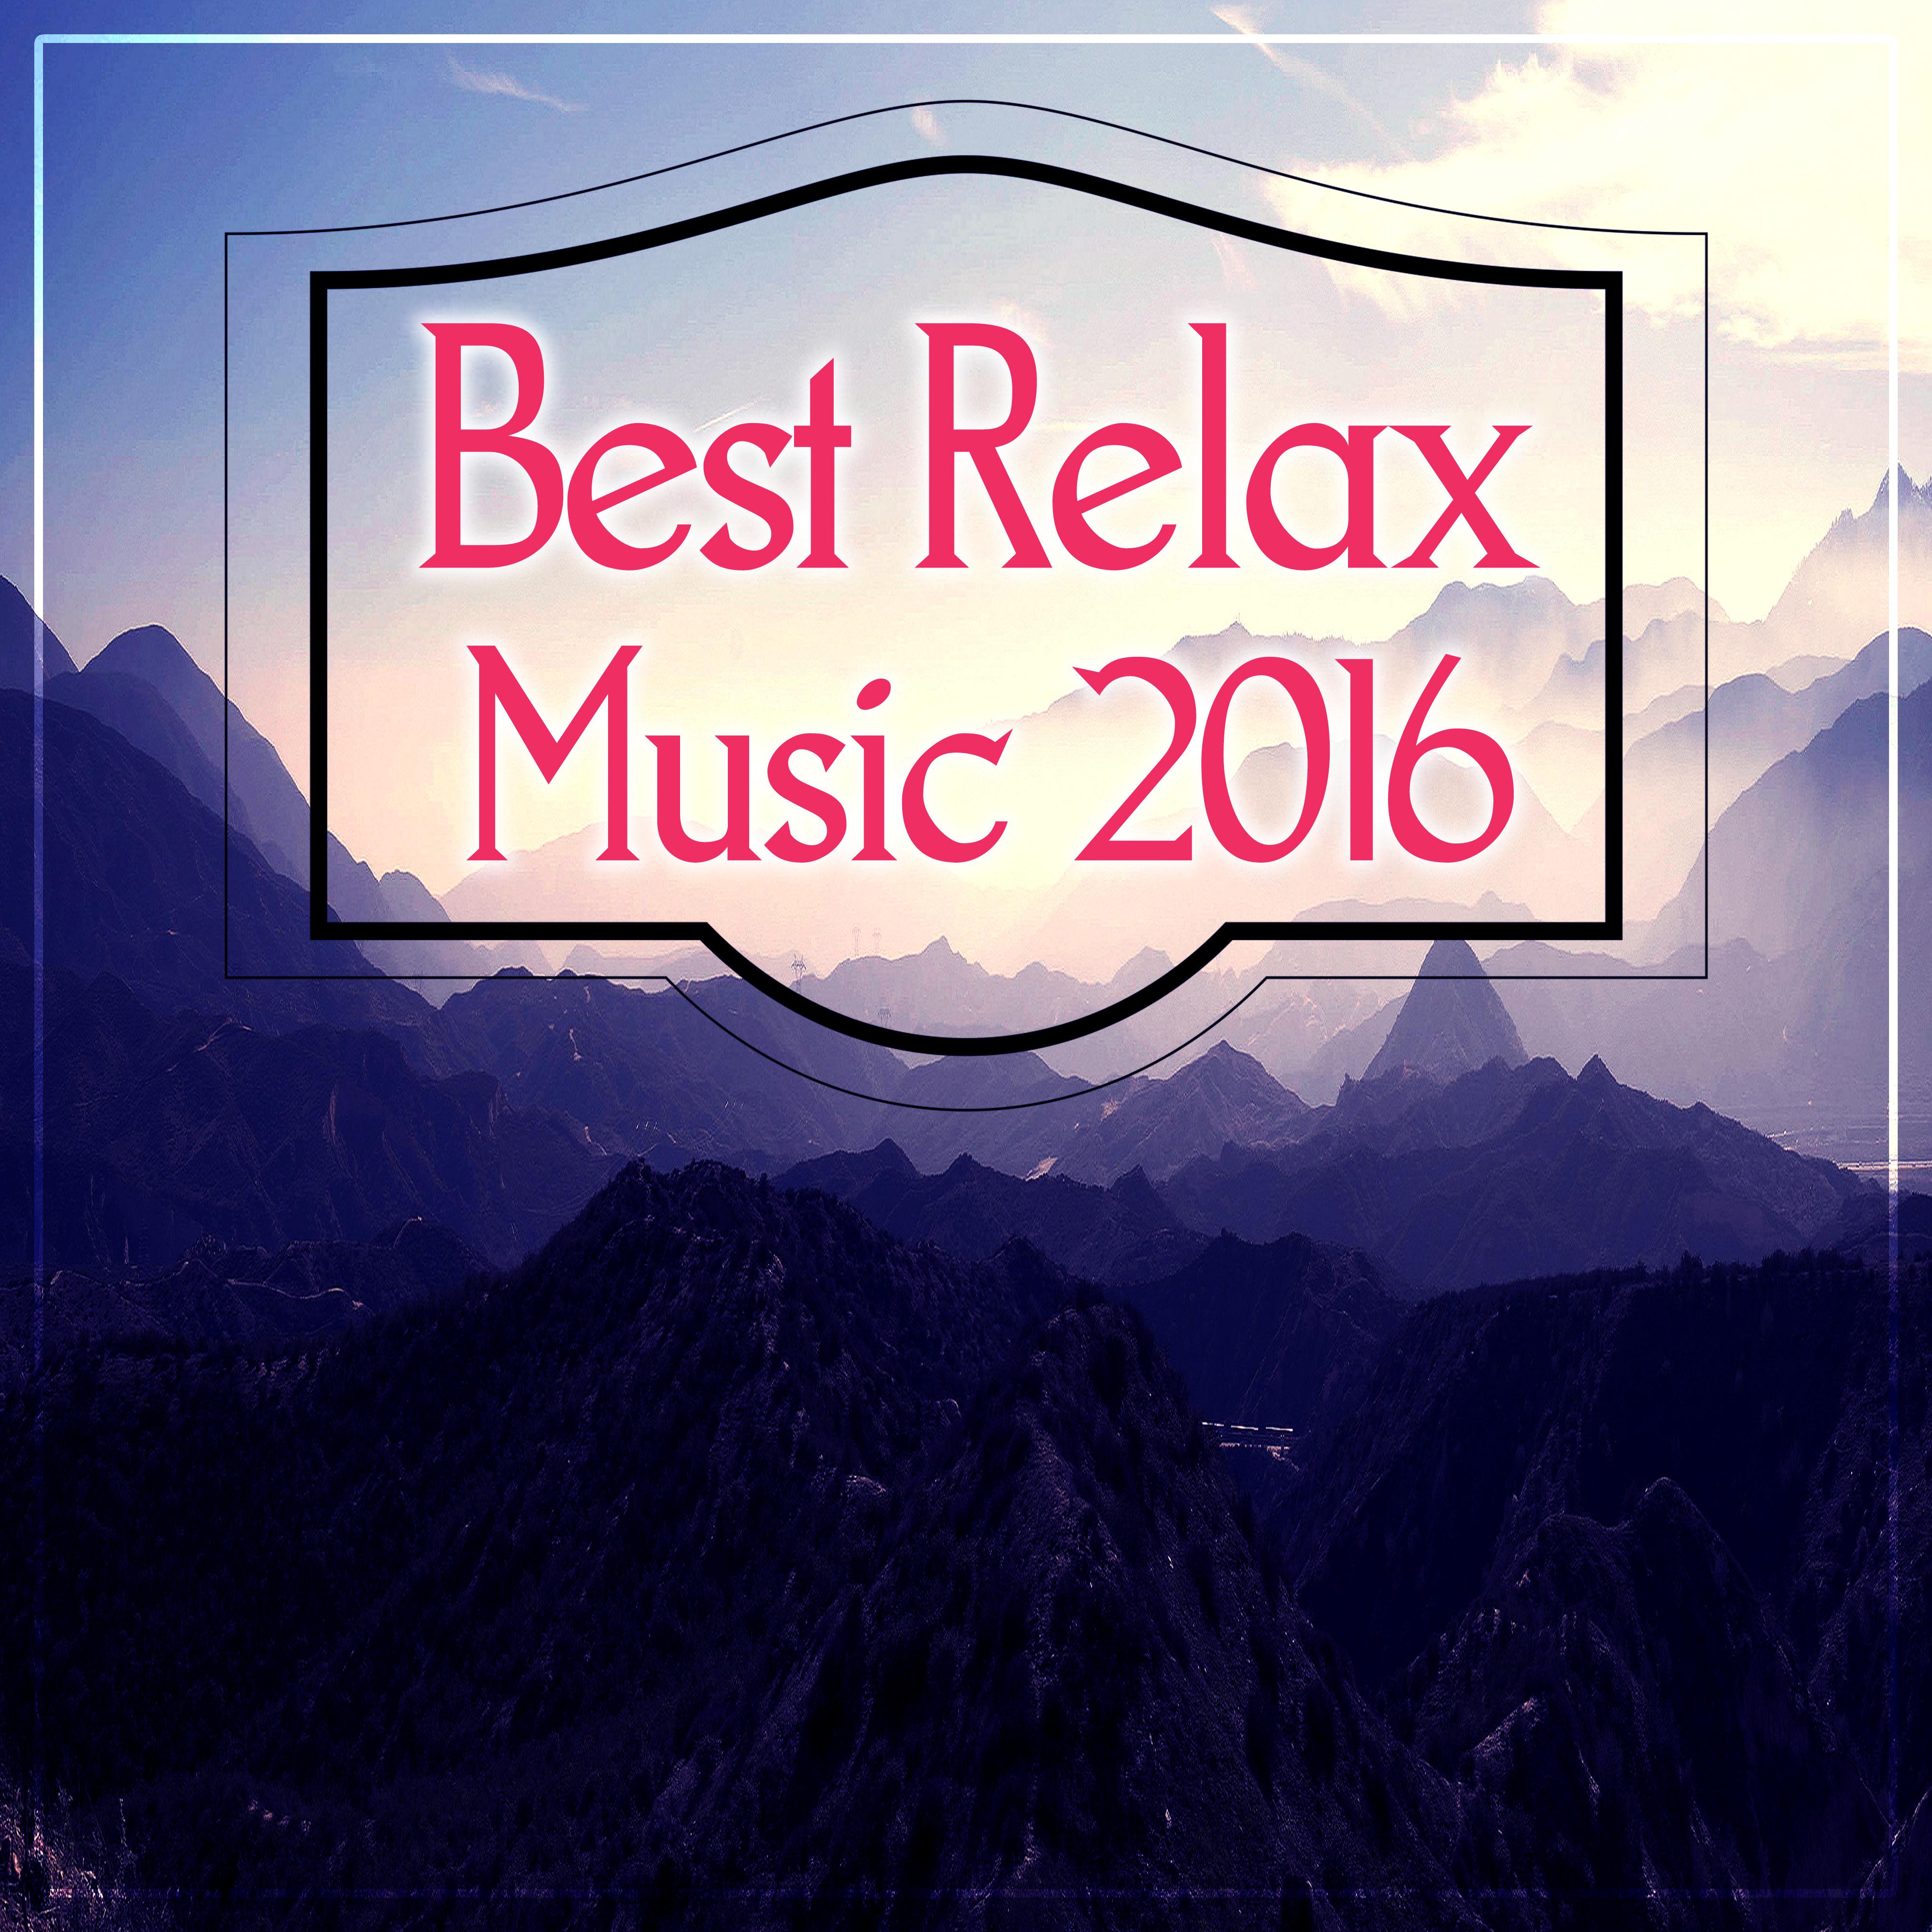 Best Relax Music 2016 – Nature Sounds for Bath Relaxation, Background Music for SPA, Free Time & Rest, New Age Music